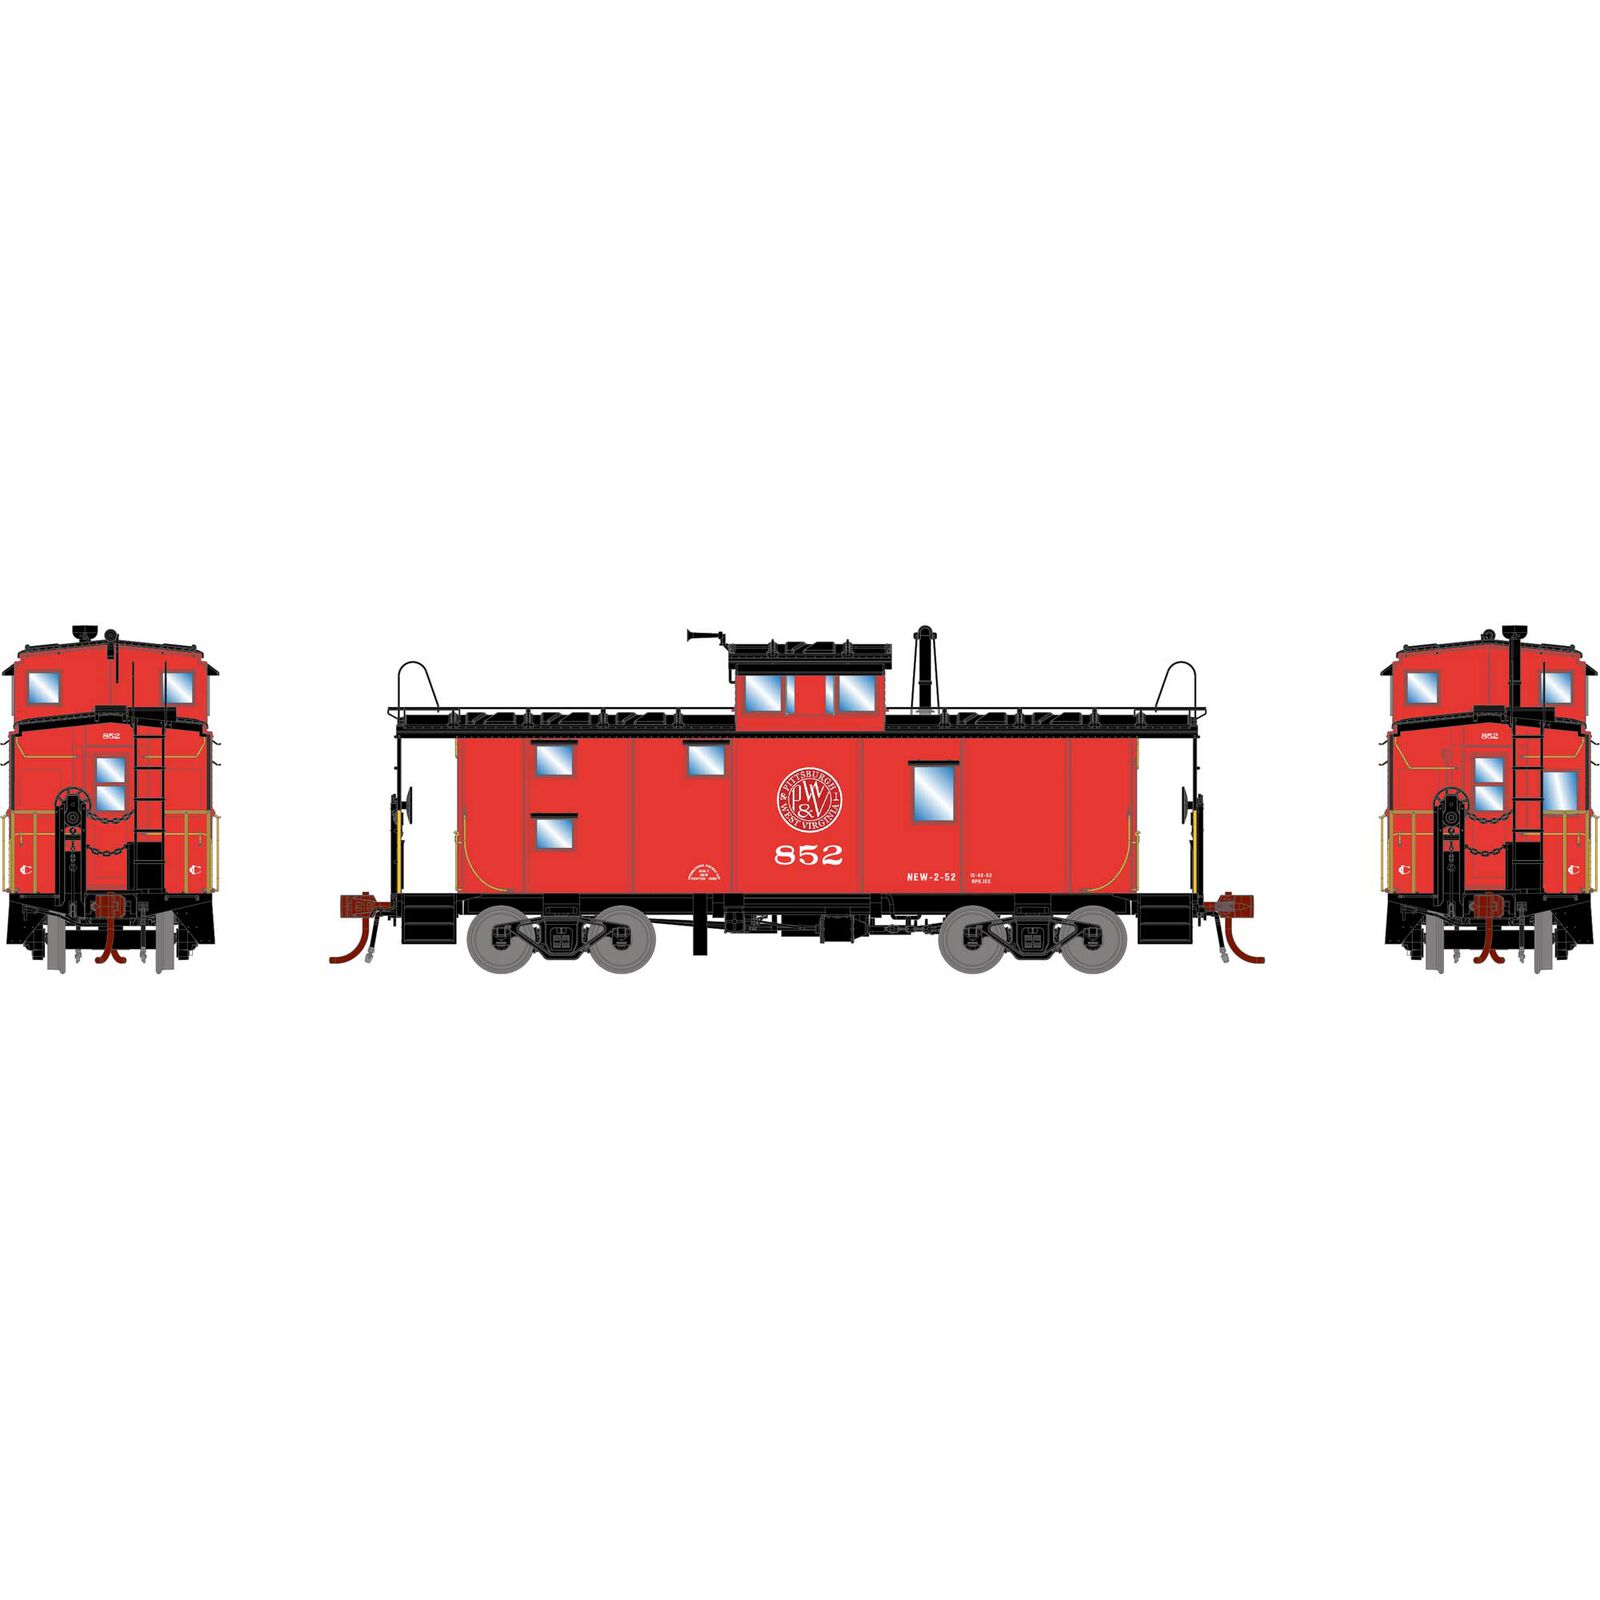 HO ICC Caboose with Lights, P&WV #852